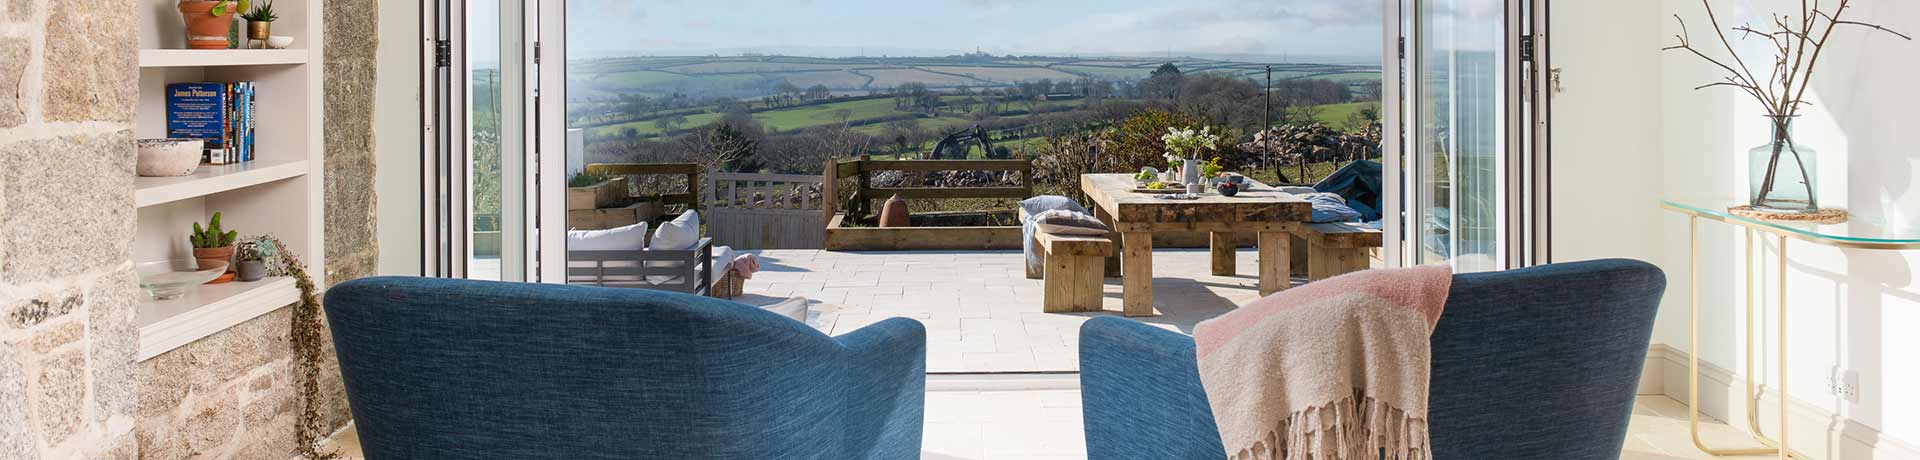 Last Minute Holiday Cottages in Hampshire with Special Offers